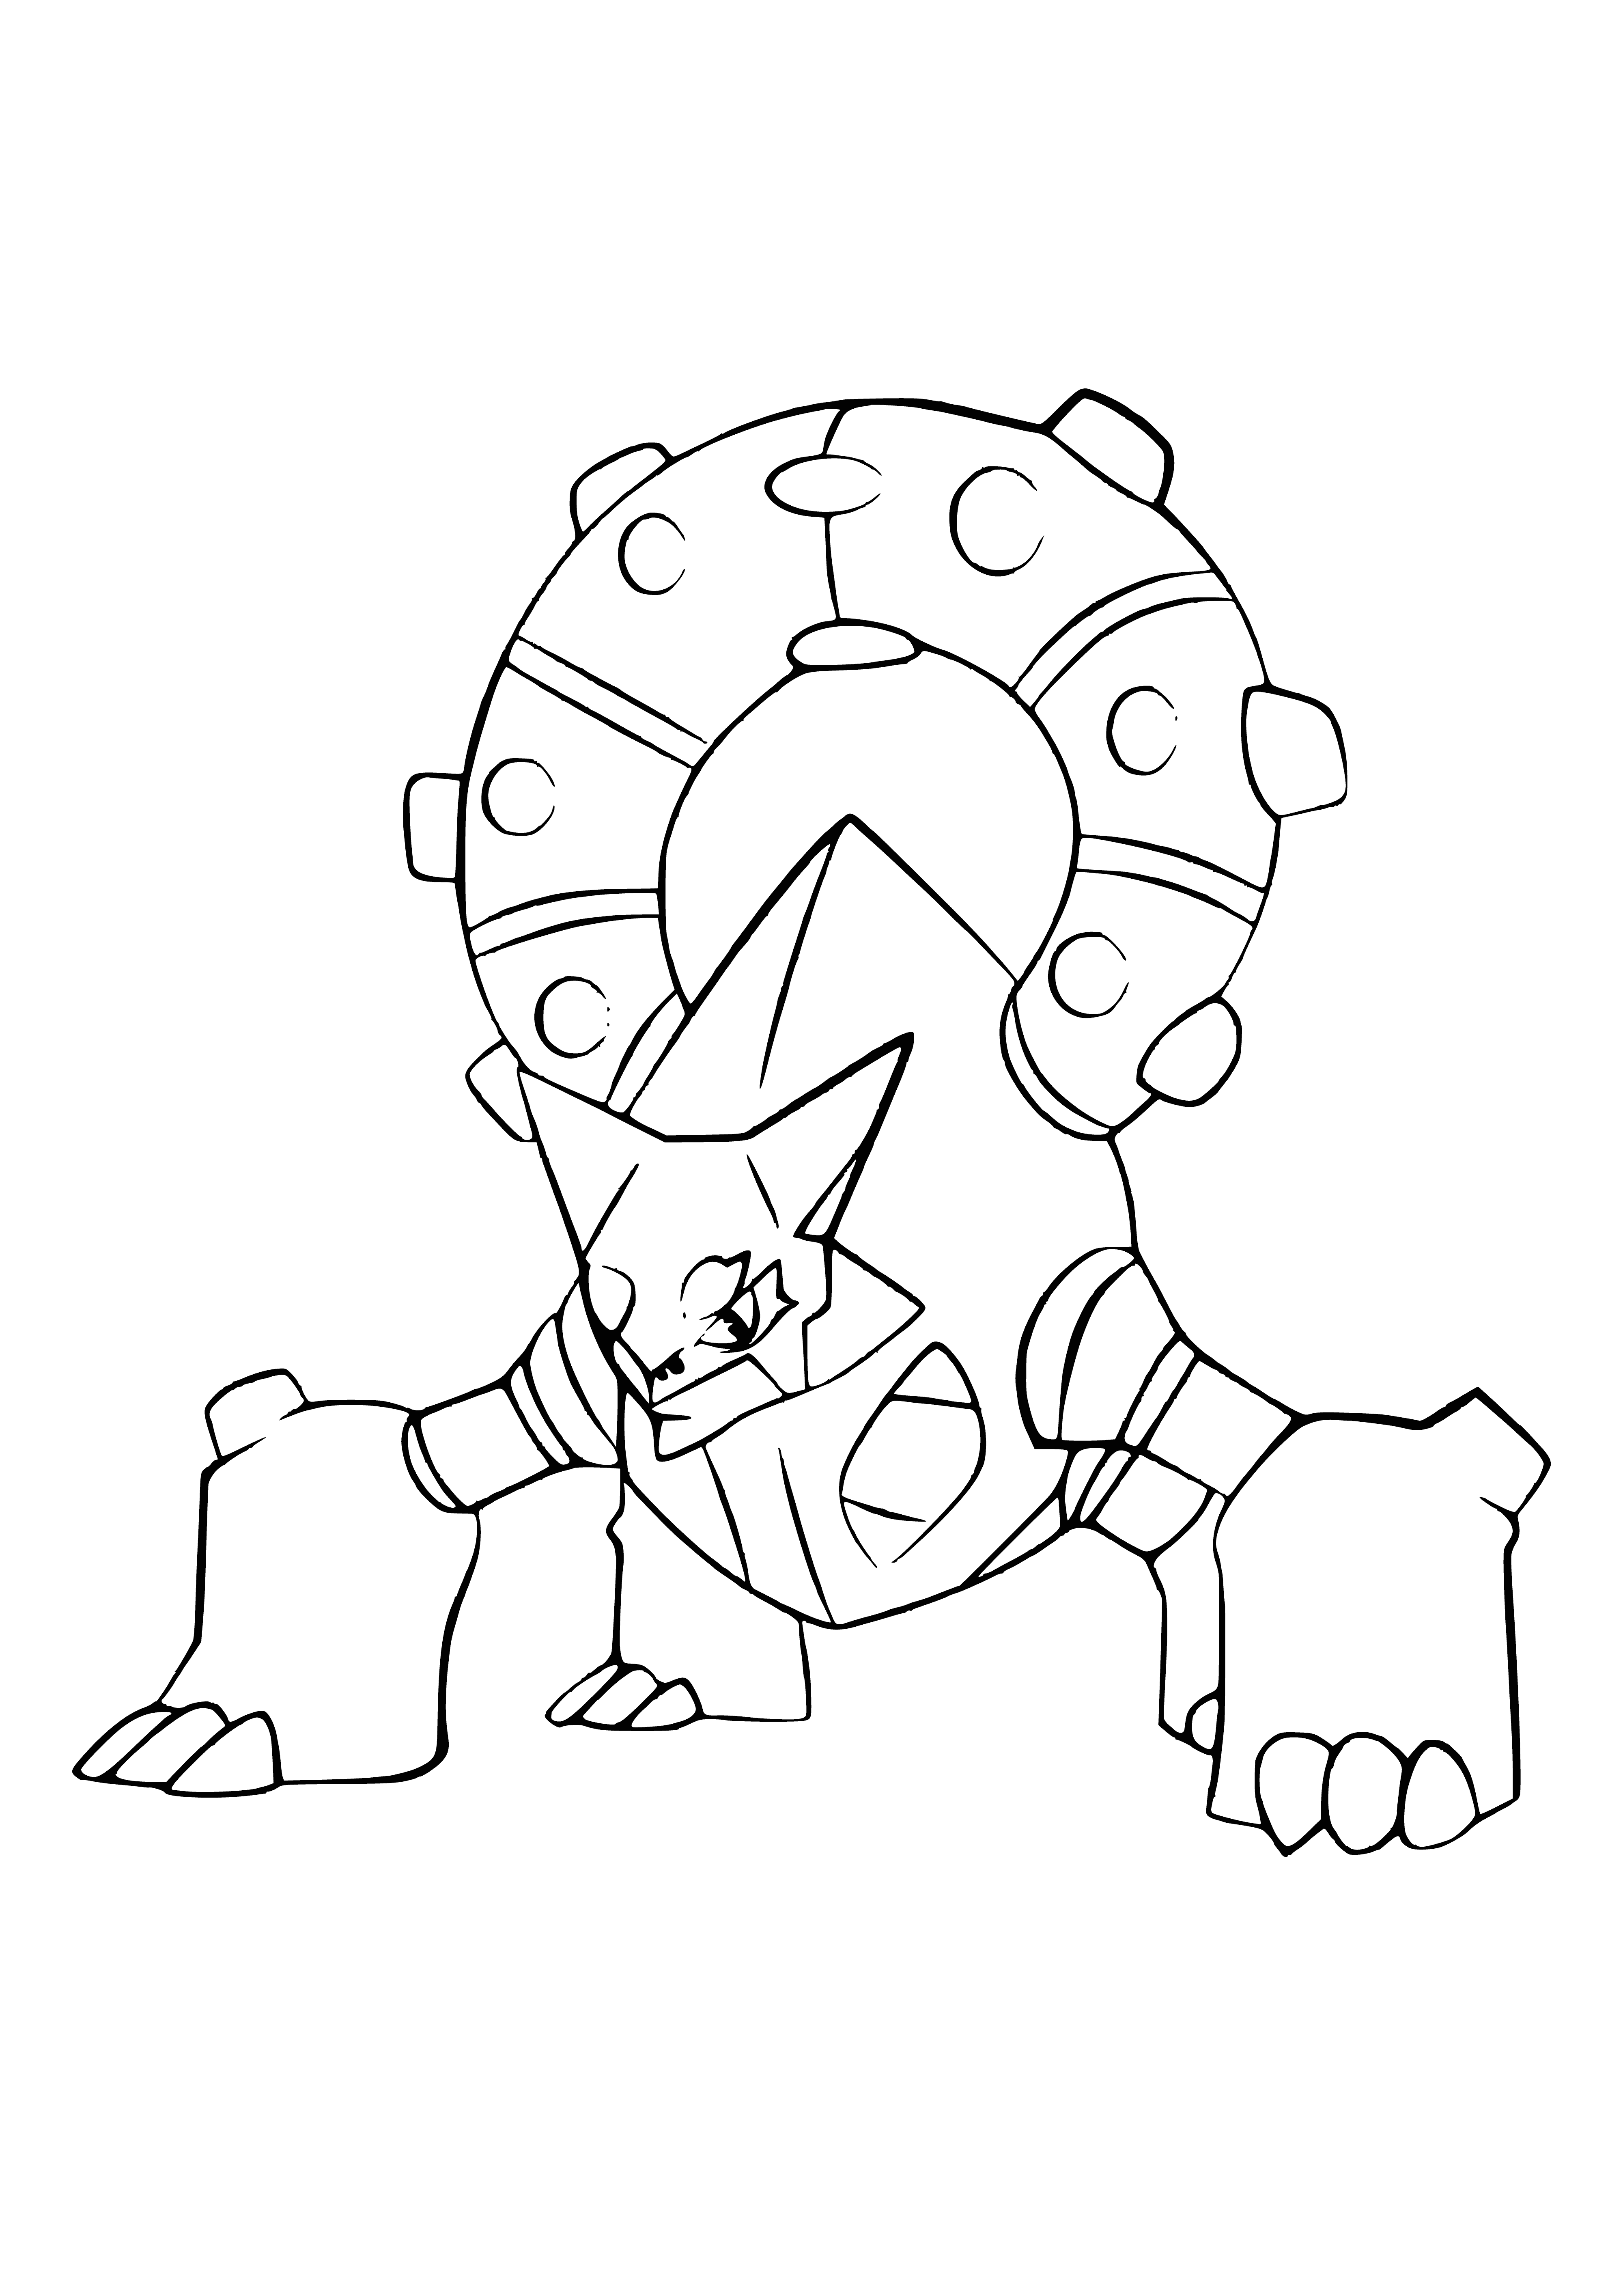 coloring page: Legendary Pokemon Volcanion is Fire/Water type with move Steam Eruption, red body, long neck/tail, two large horns, four small horns, two large wings, two small legs, red eyes, and a large sharp mouth.